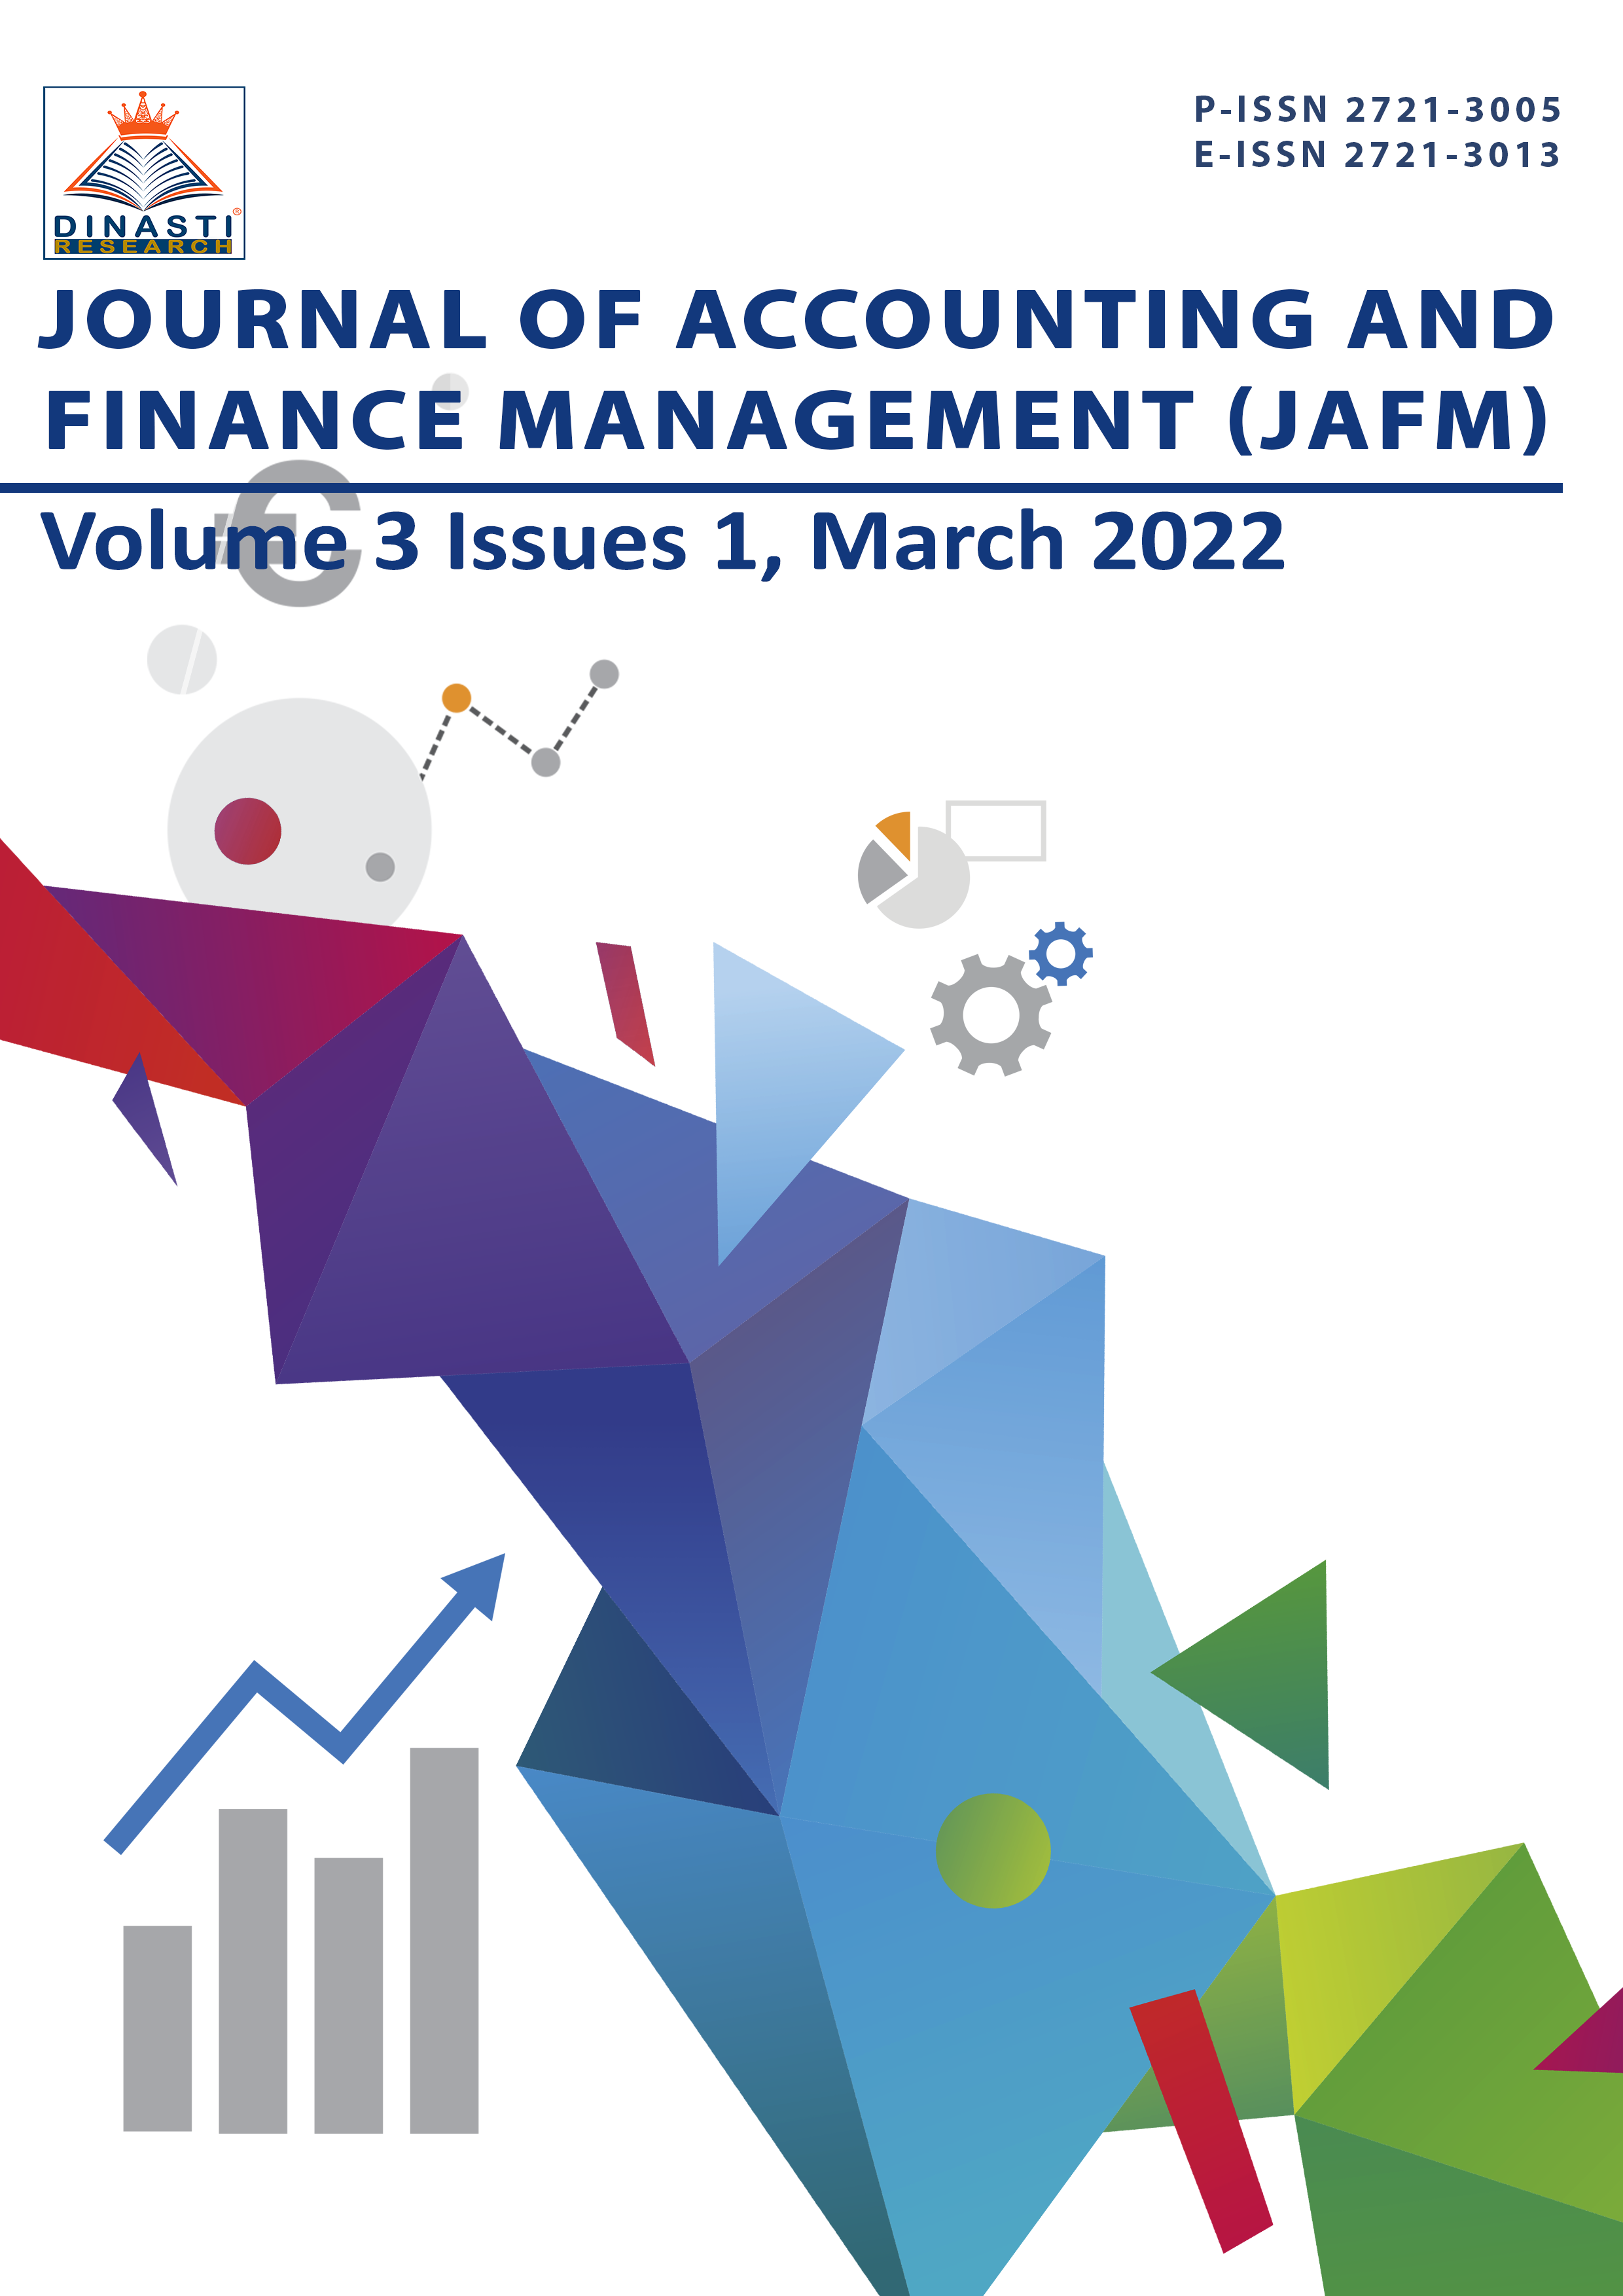 					View Vol. 3 No. 1 (2022): Journal of Accounting and Finance Management (March-April 2022)
				